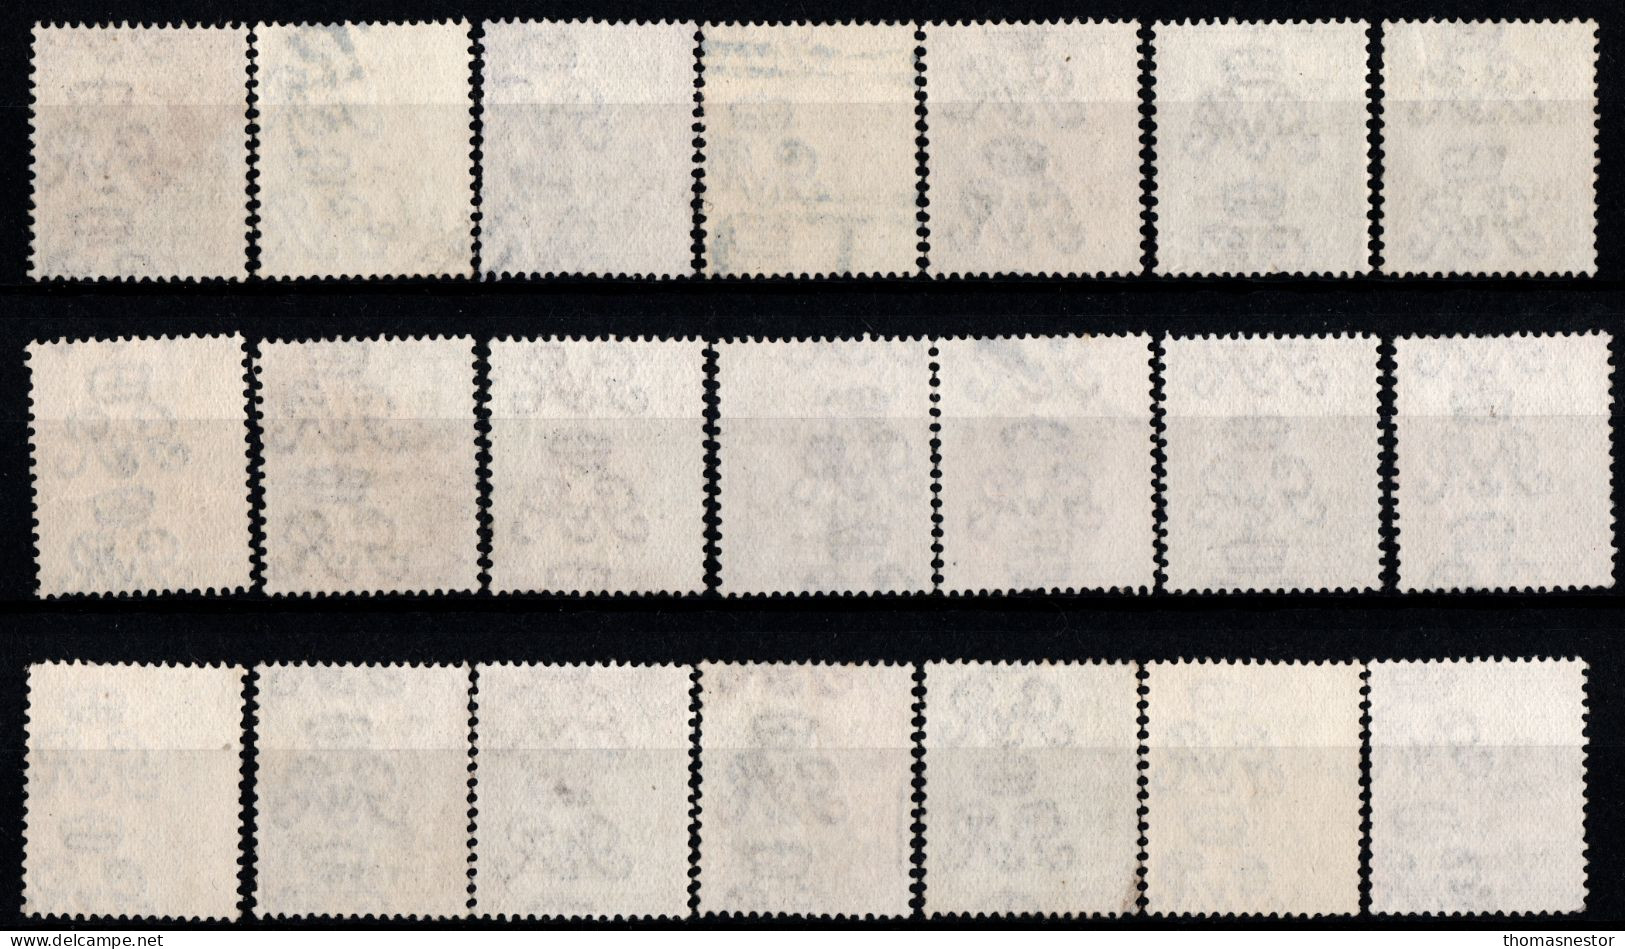 1922 Thom Rialtas 5 line Blue Black Ink (July- Nov) Used Fiscal cancellation, parcel/ commercial cancel 294 in total.